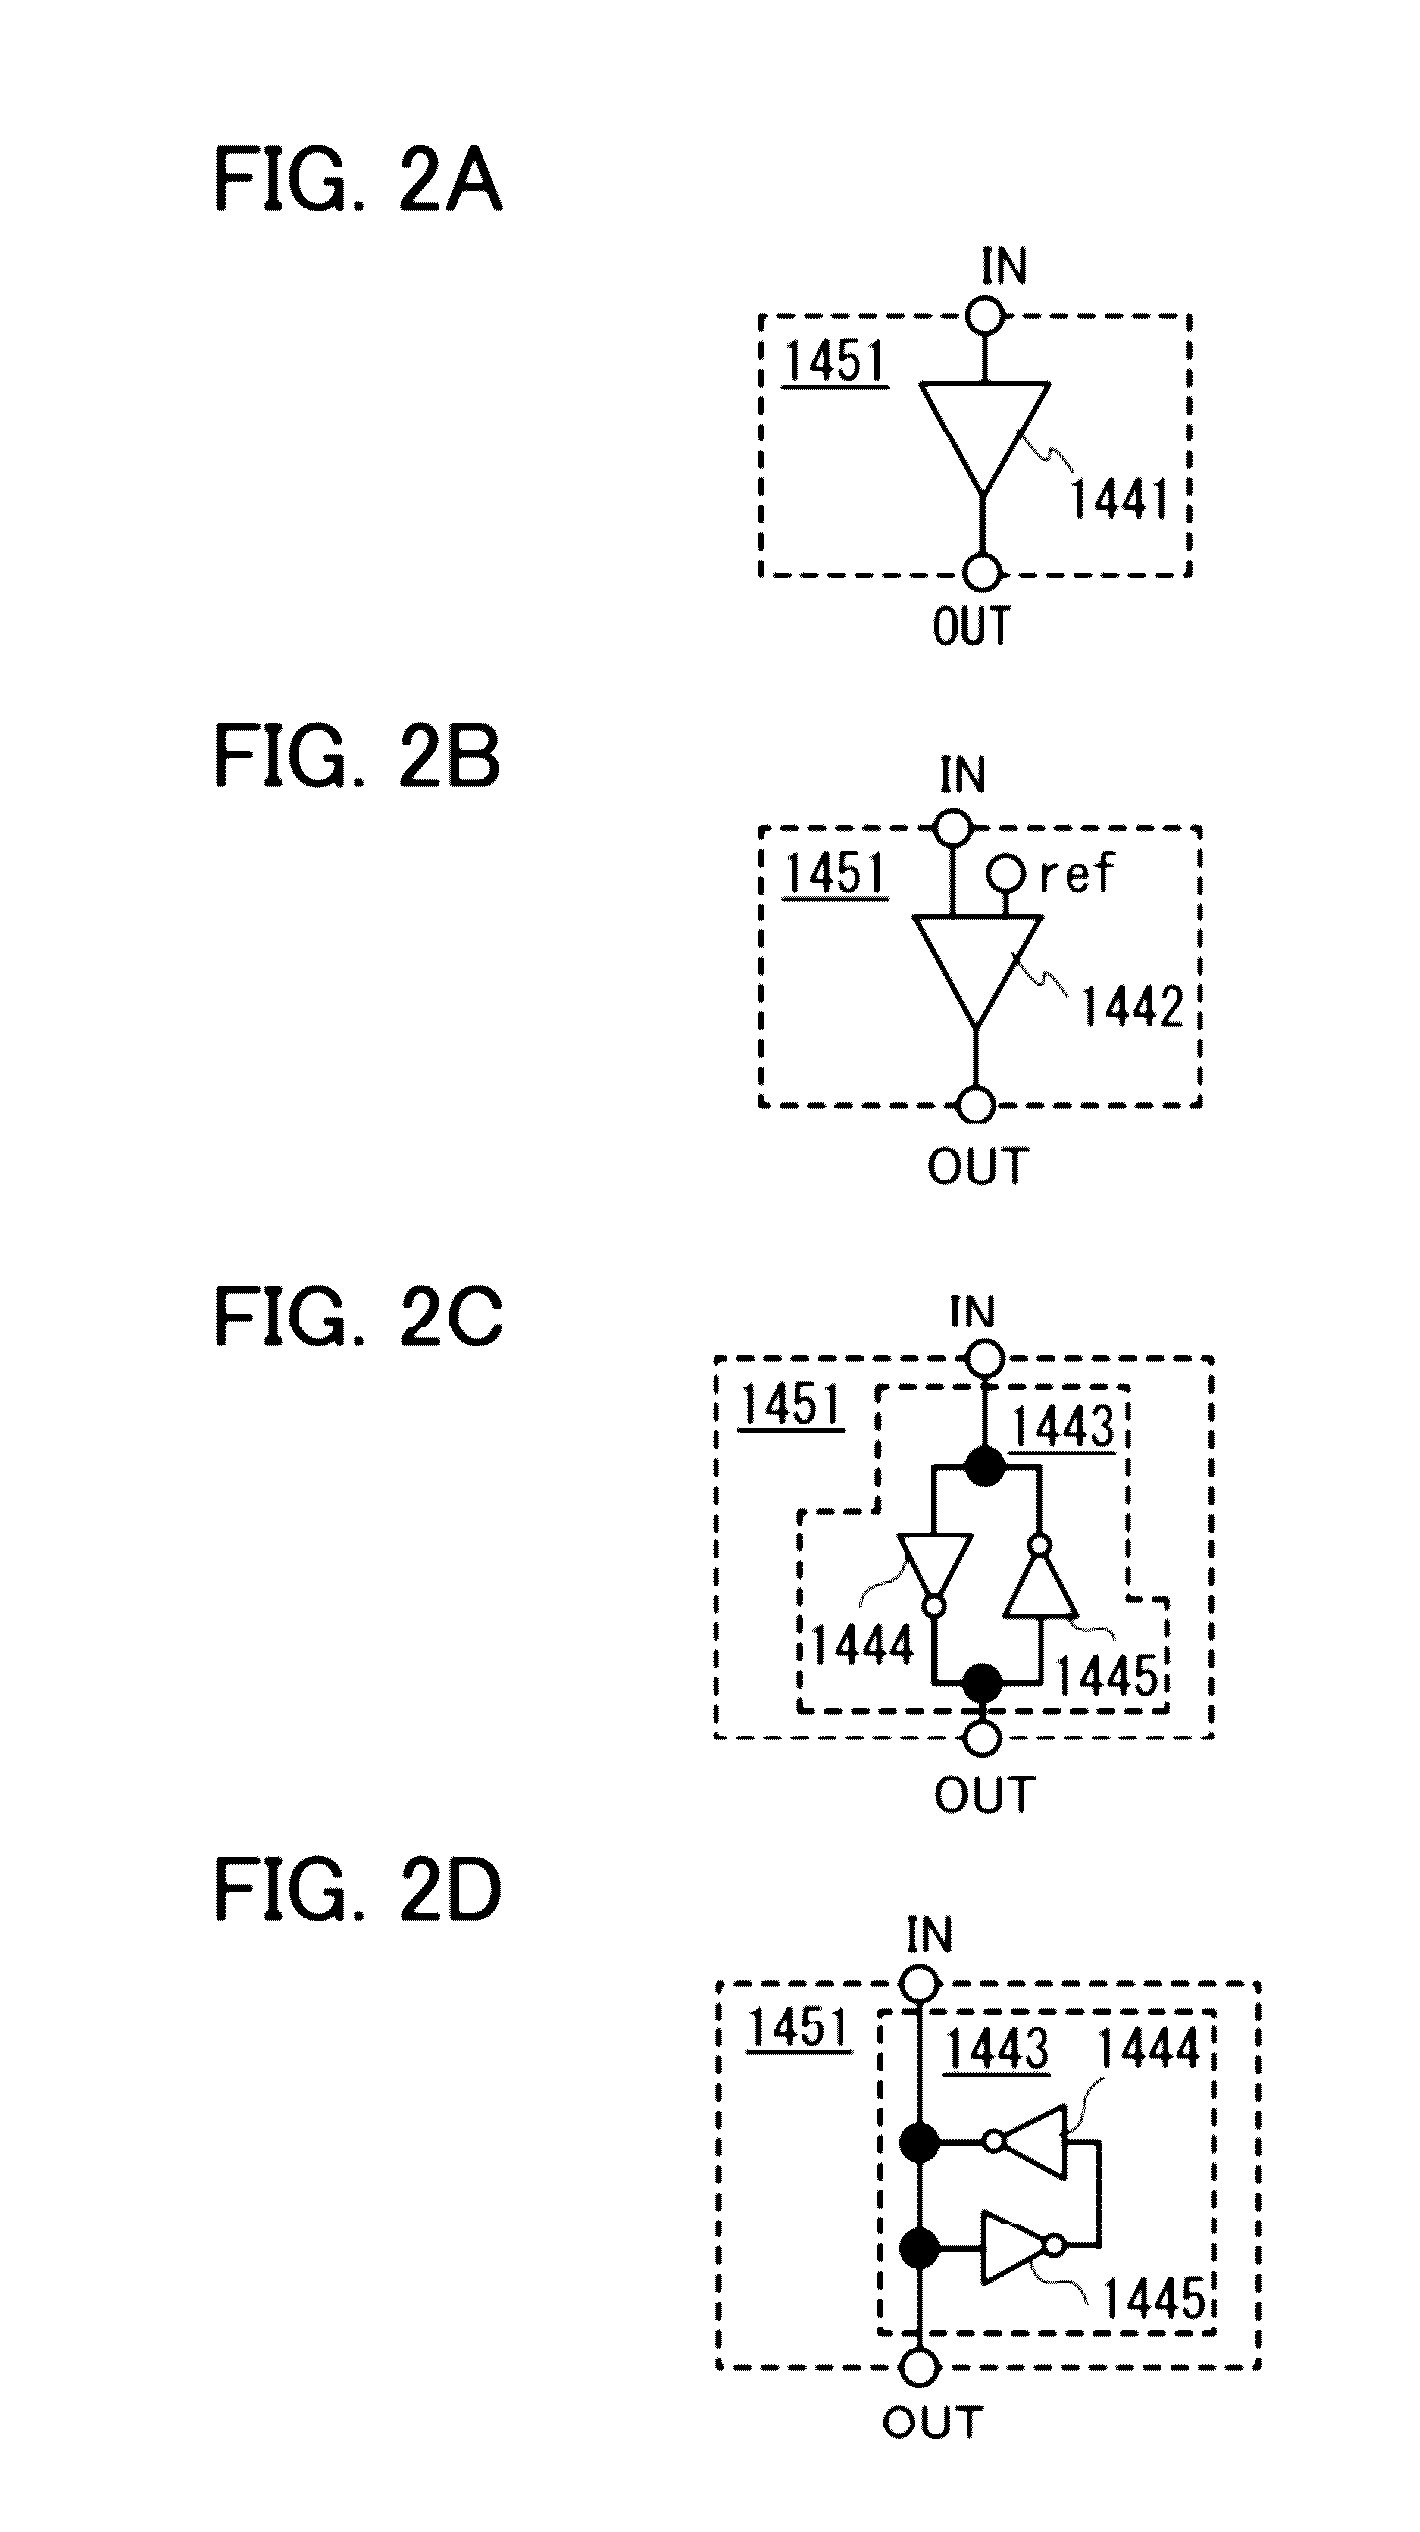 Memory element and signal processing circuit